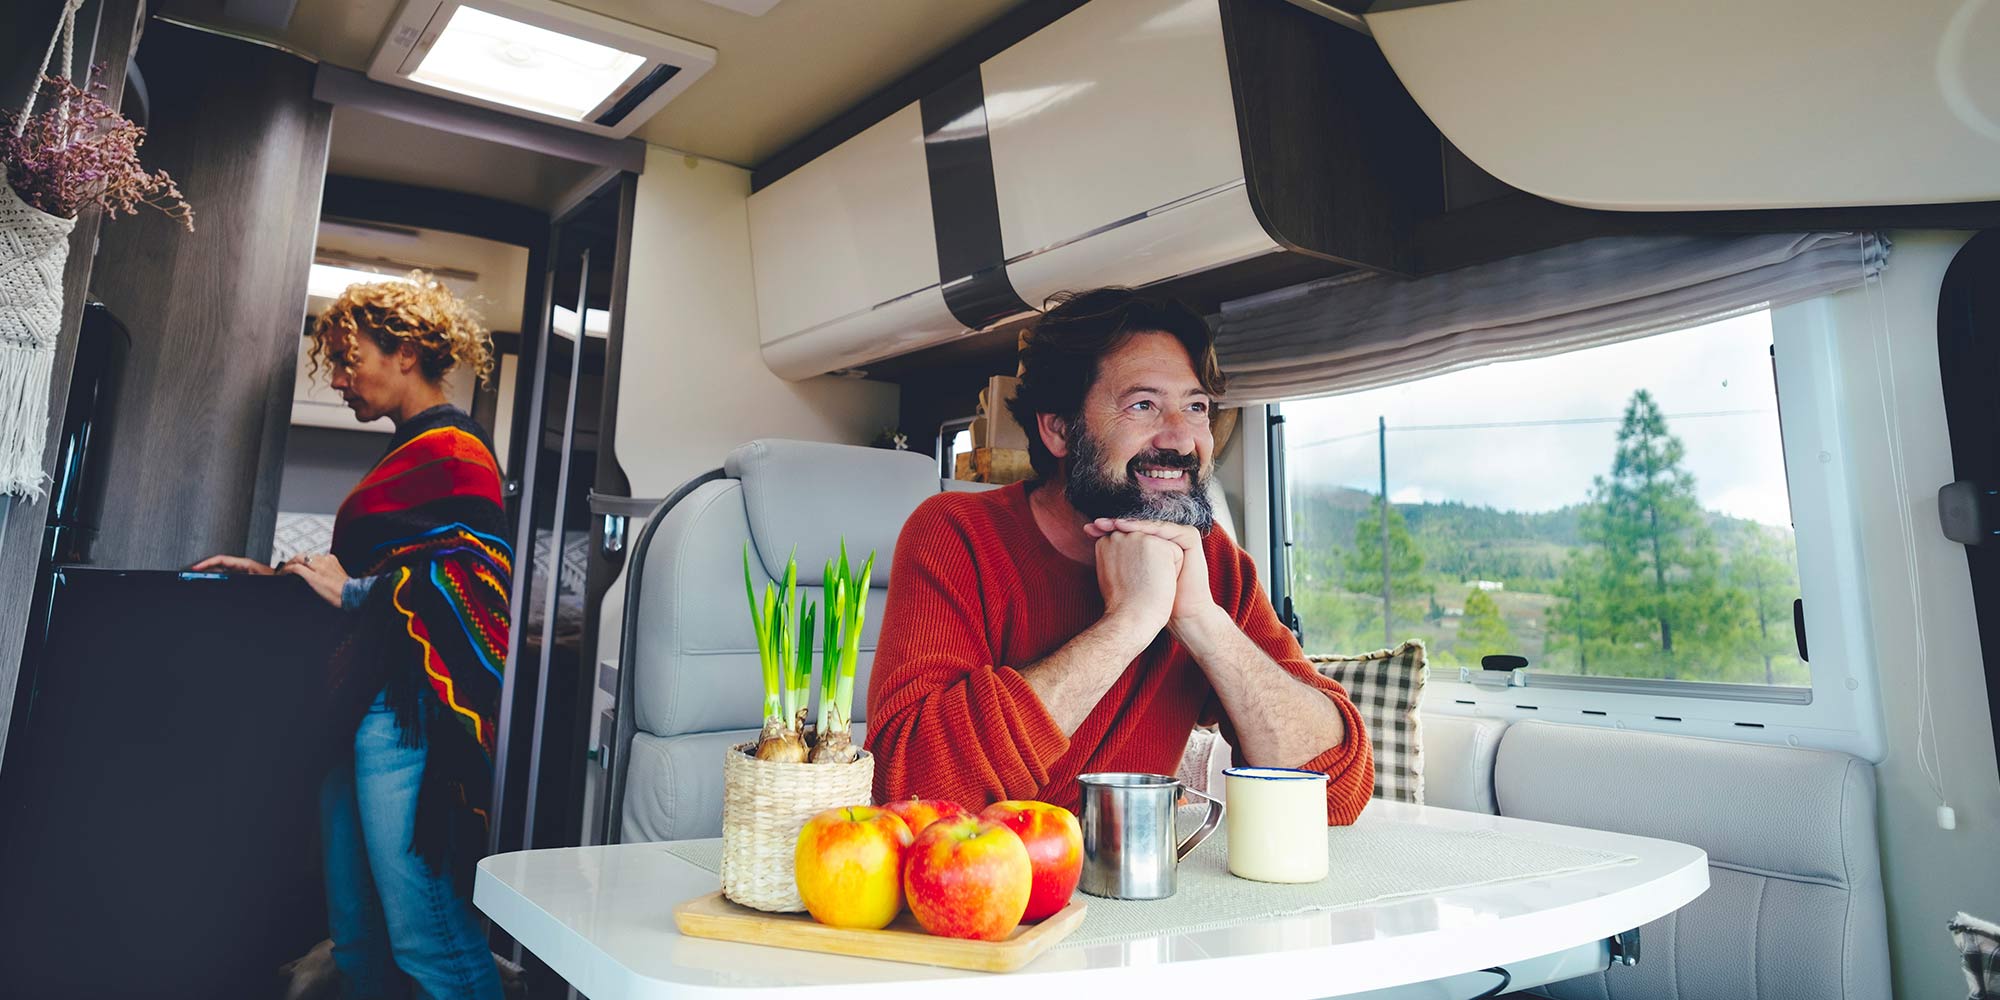 How To Live in an RV Full-Time